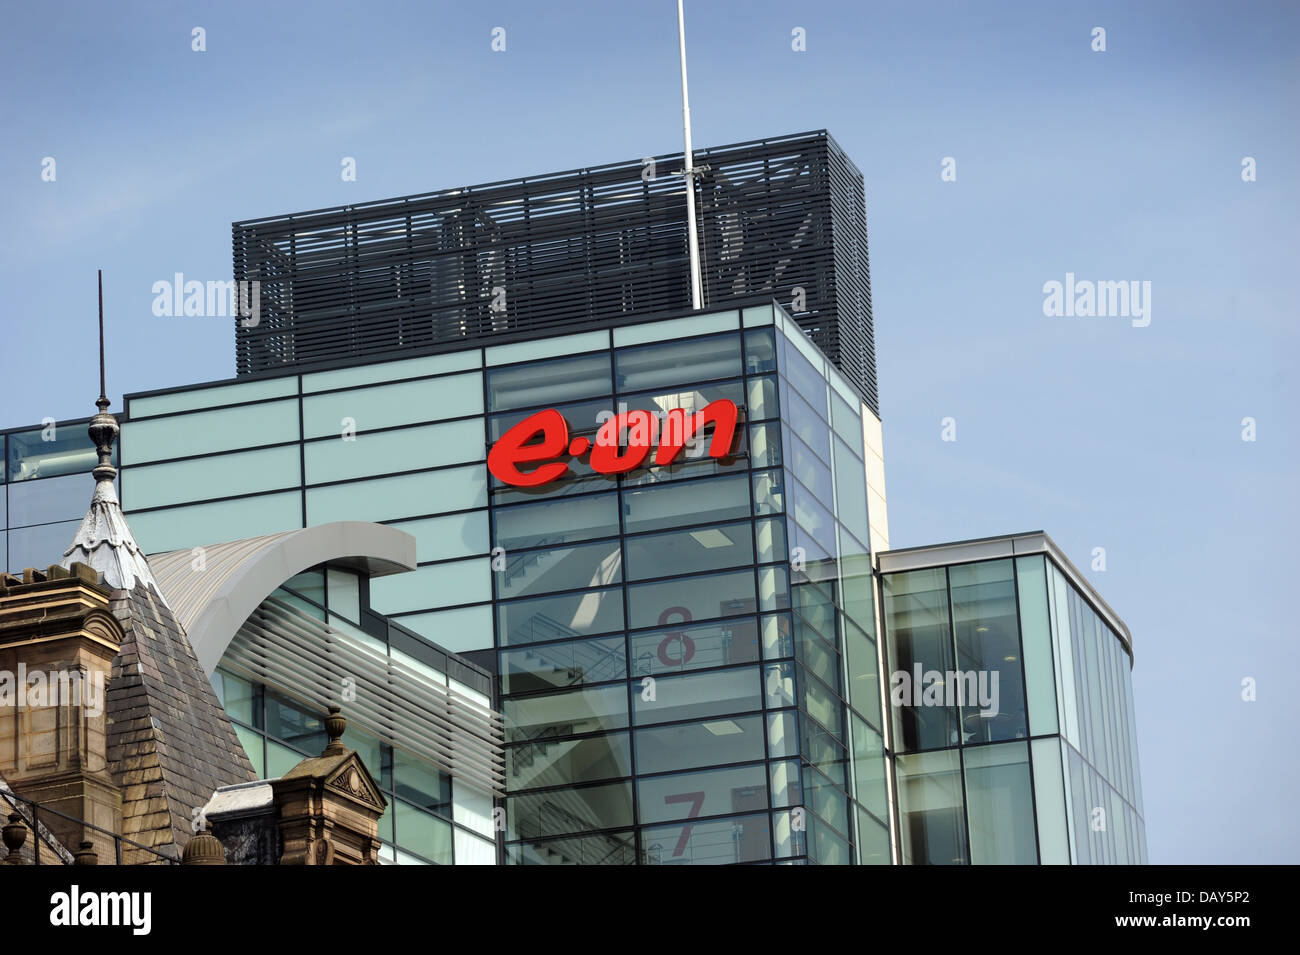 EON ELECTRICITY COMPANY OFFICE BUILDING IN NOTTINGHAM CITY CENTRE WITH EON LOGO RE ENERGY BILLS COSTS PROFITS FUEL GAS HEAT UK Stock Photo